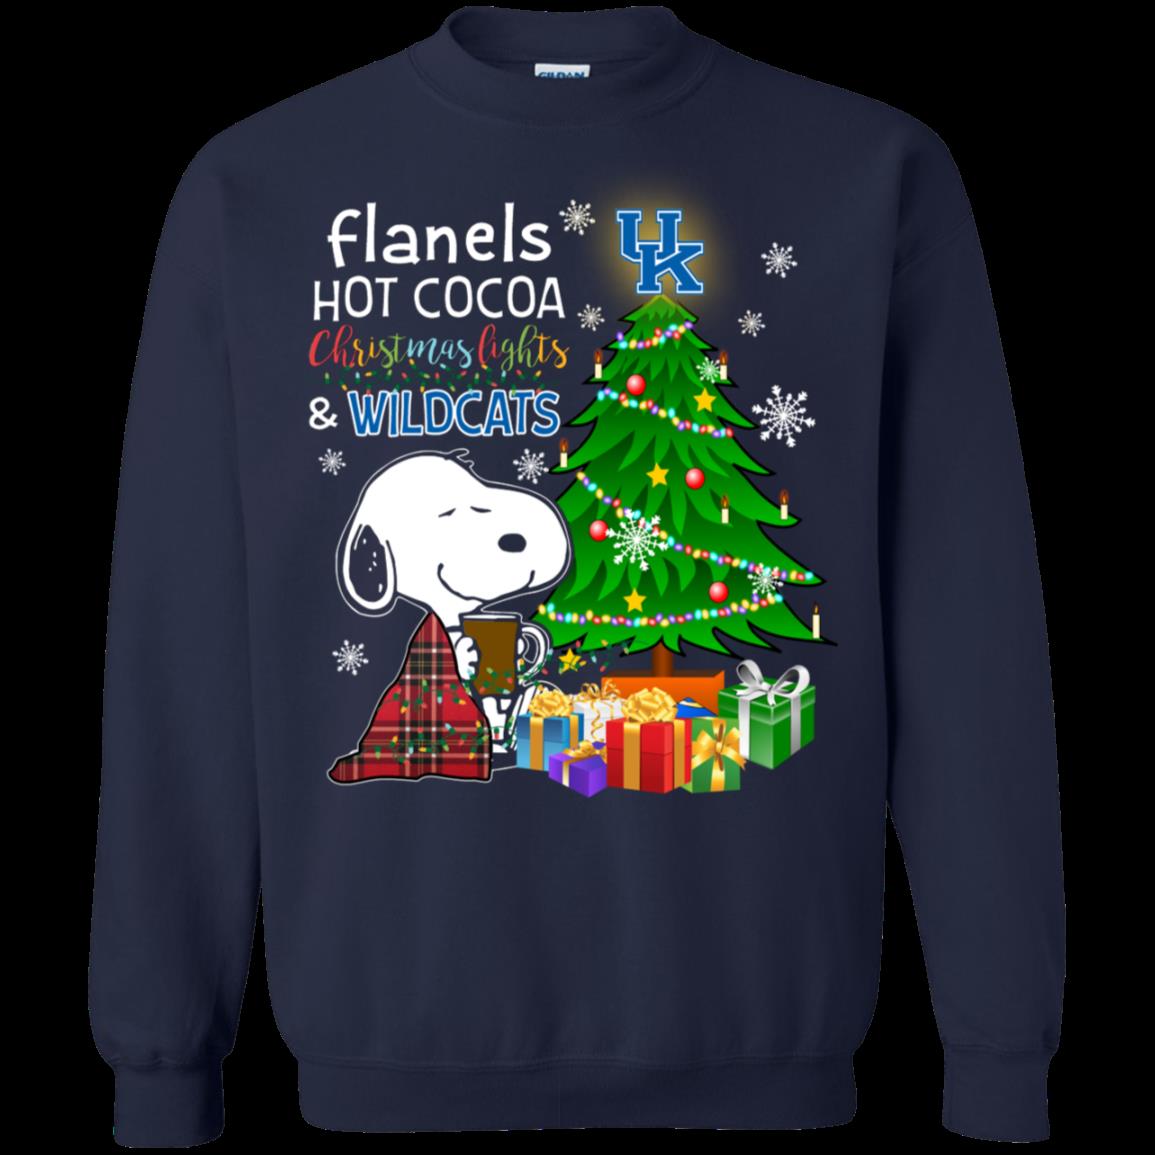 Kentucky Wildcats Snoopy Ugly Christmas Sweater Flanels Hot Cocoa 1